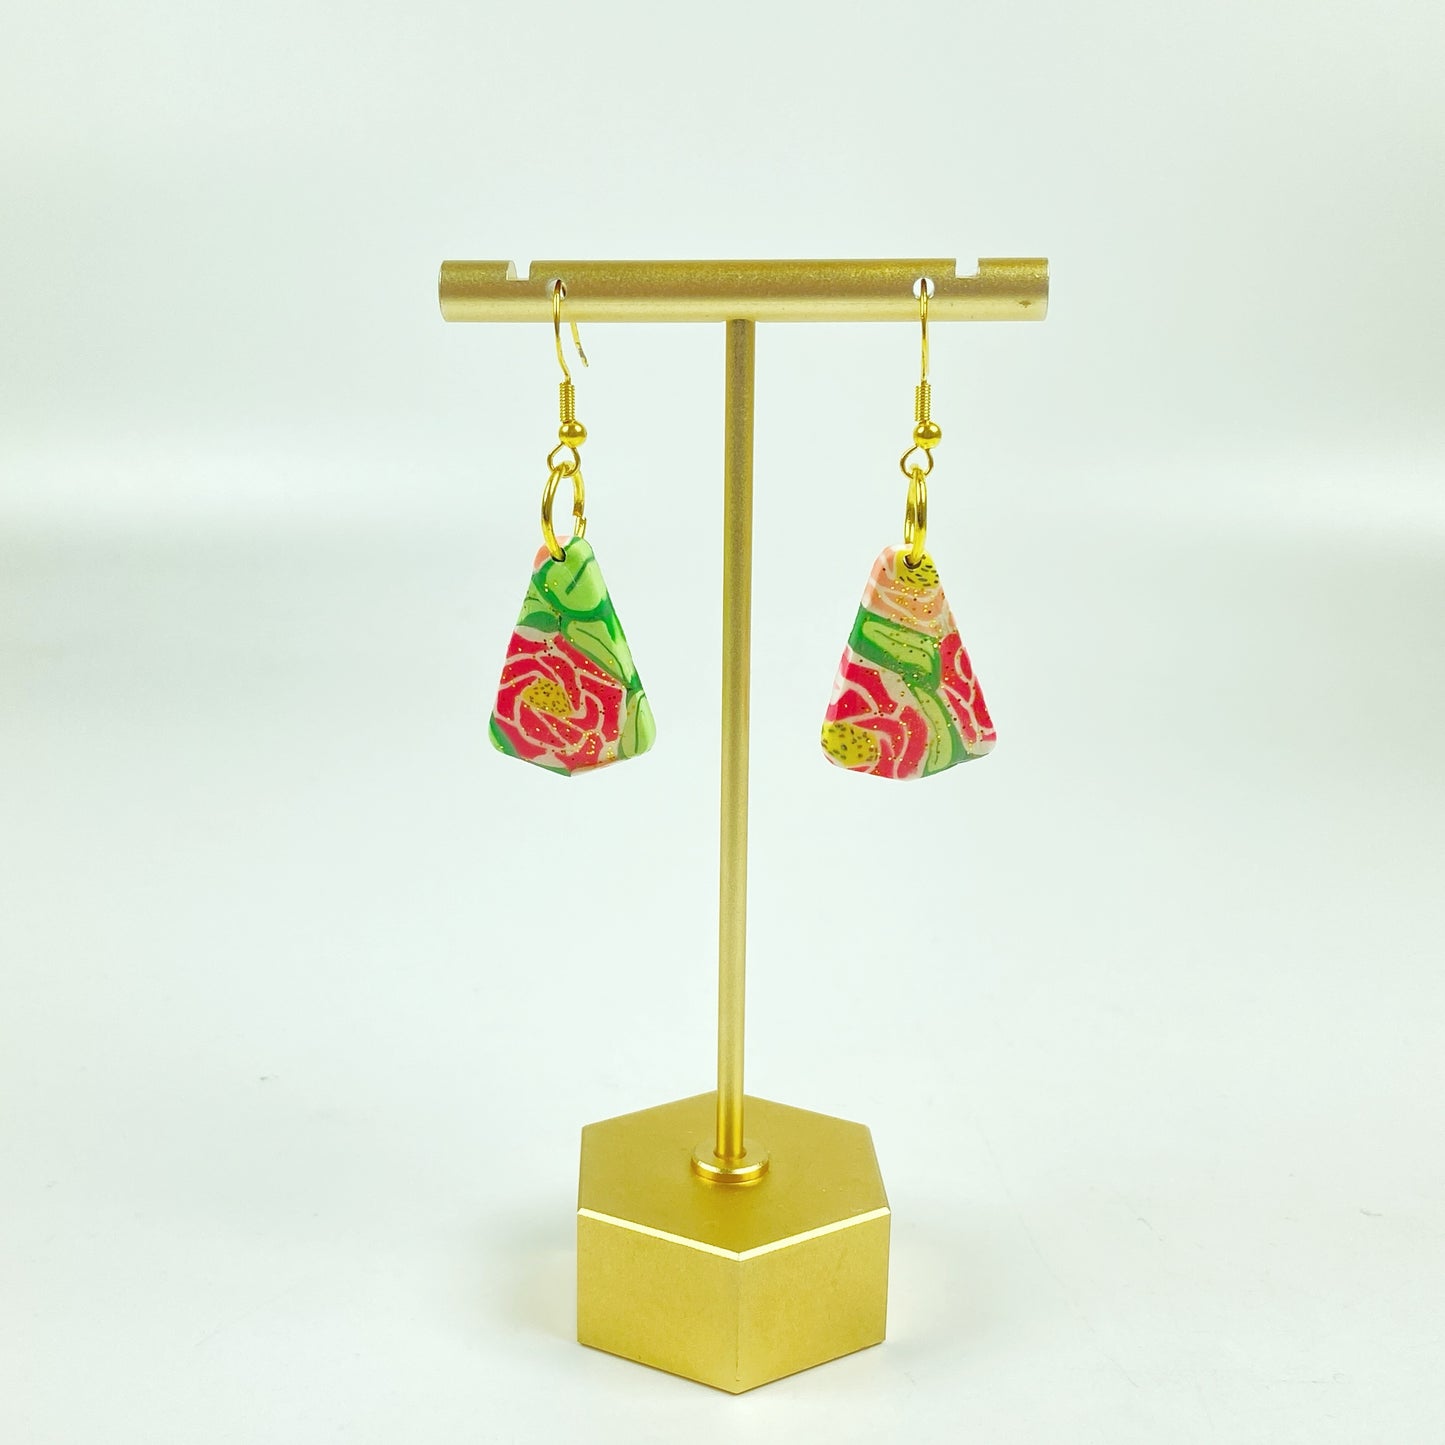 Whispering Roses Handmade Polymer Clay Dangle Earrings on a brass earring stand